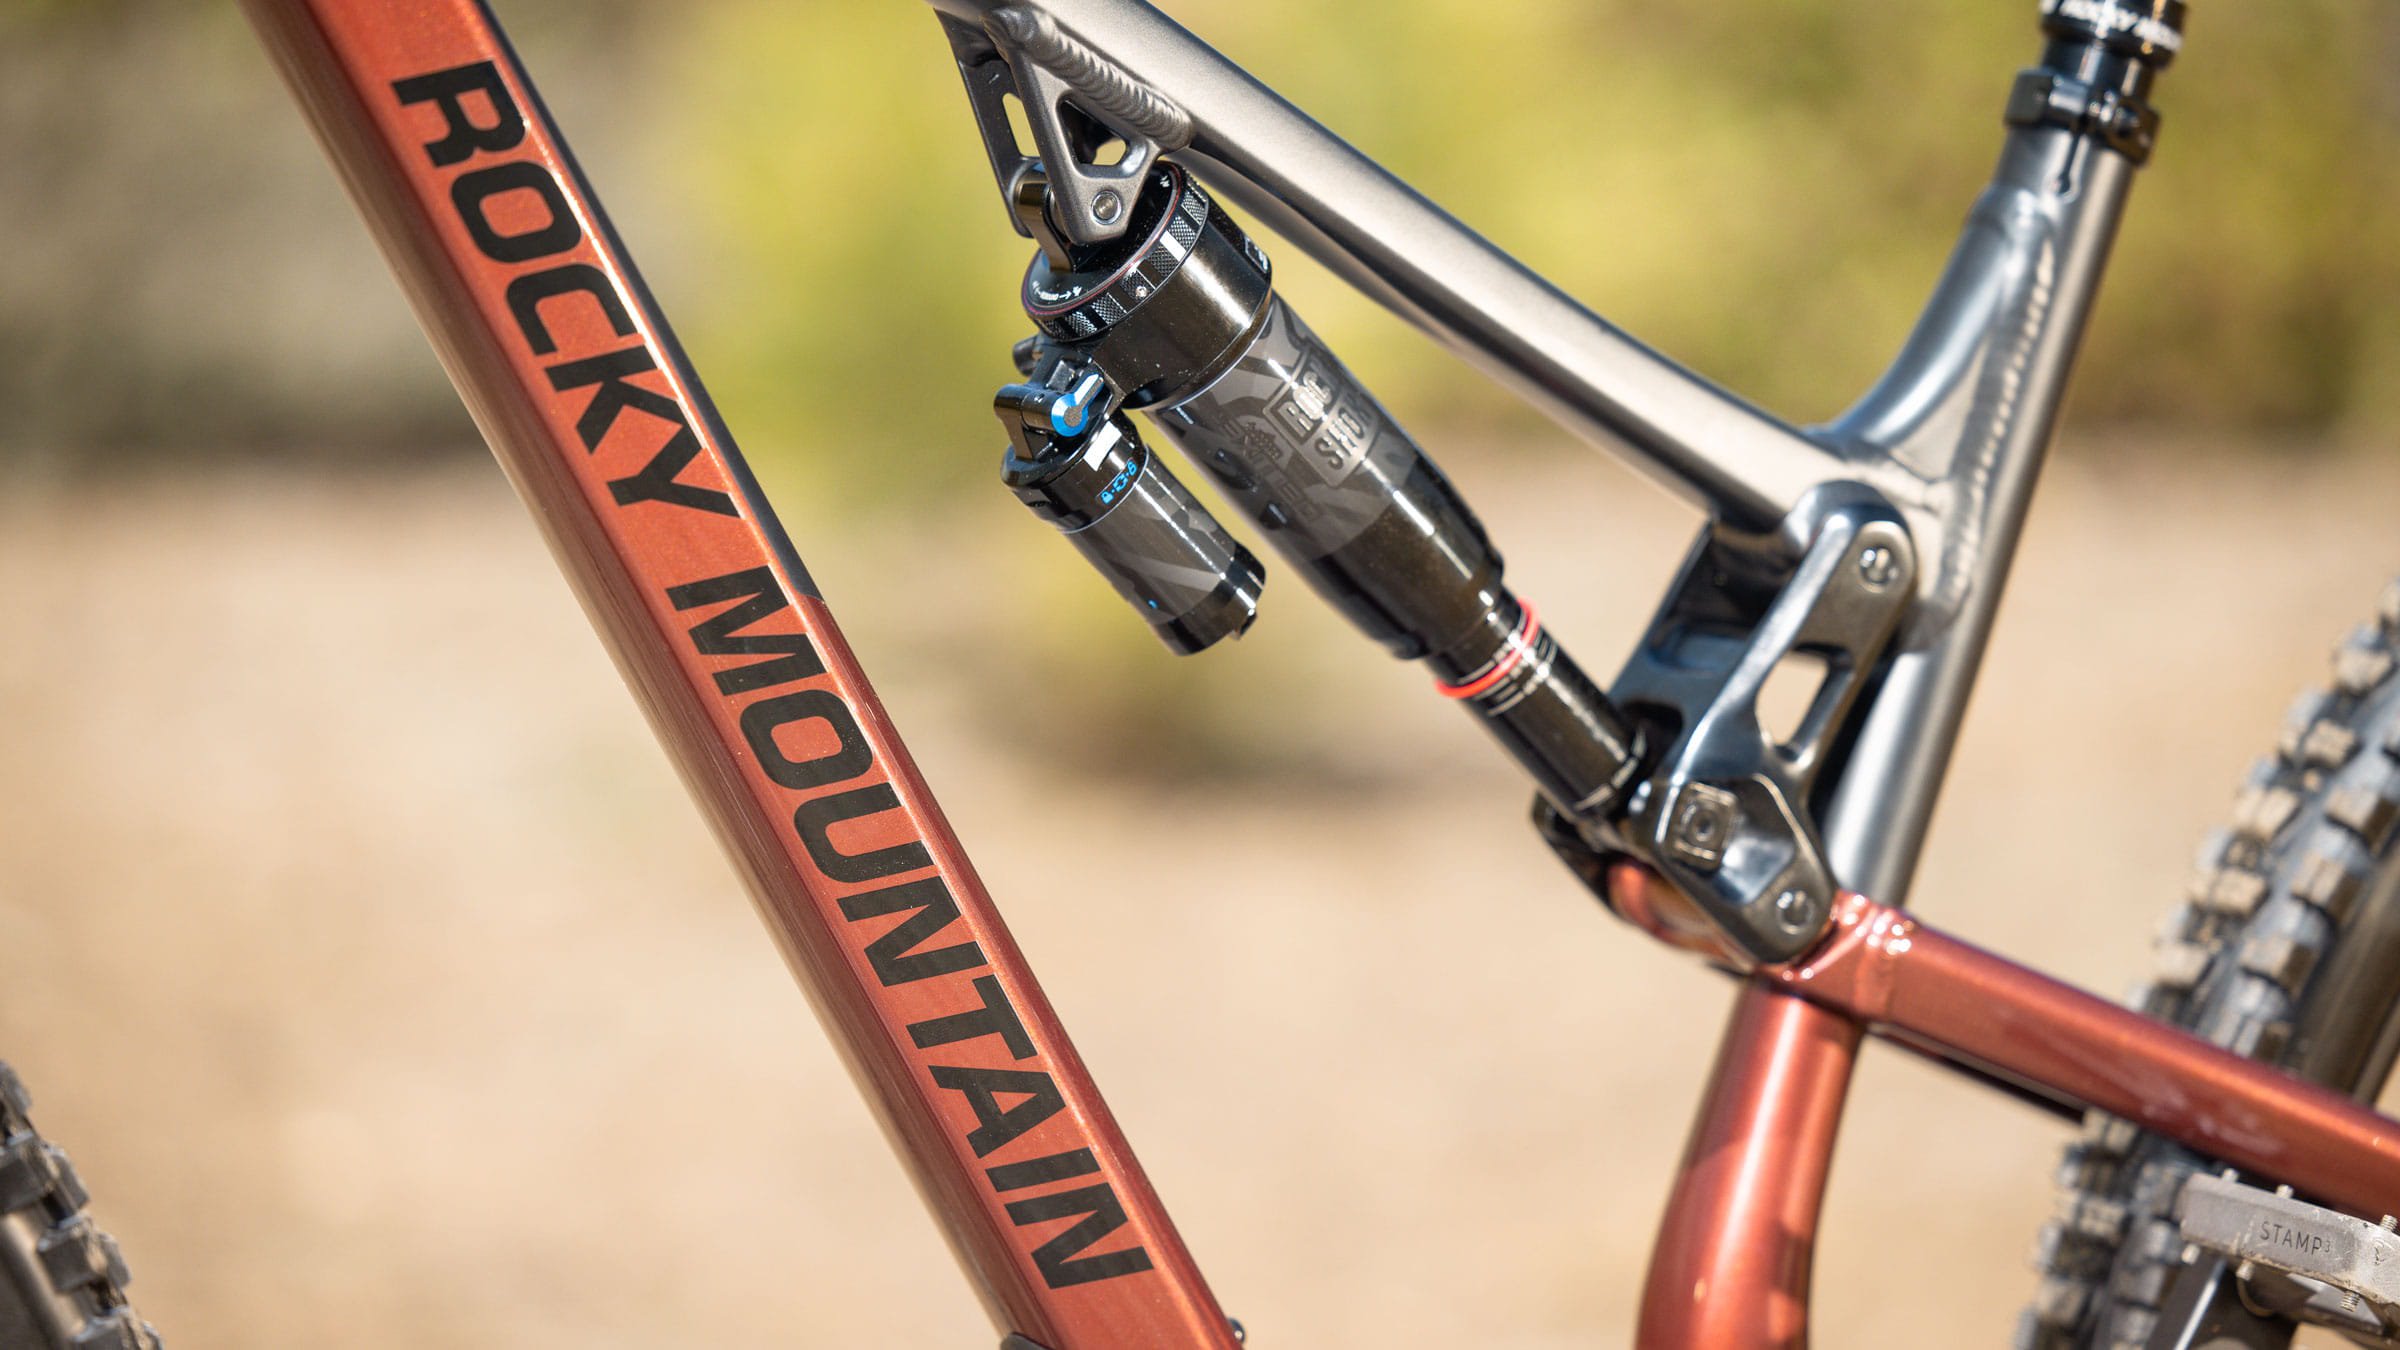 Close up of orange bike frame with Rocky Mountain written on the side